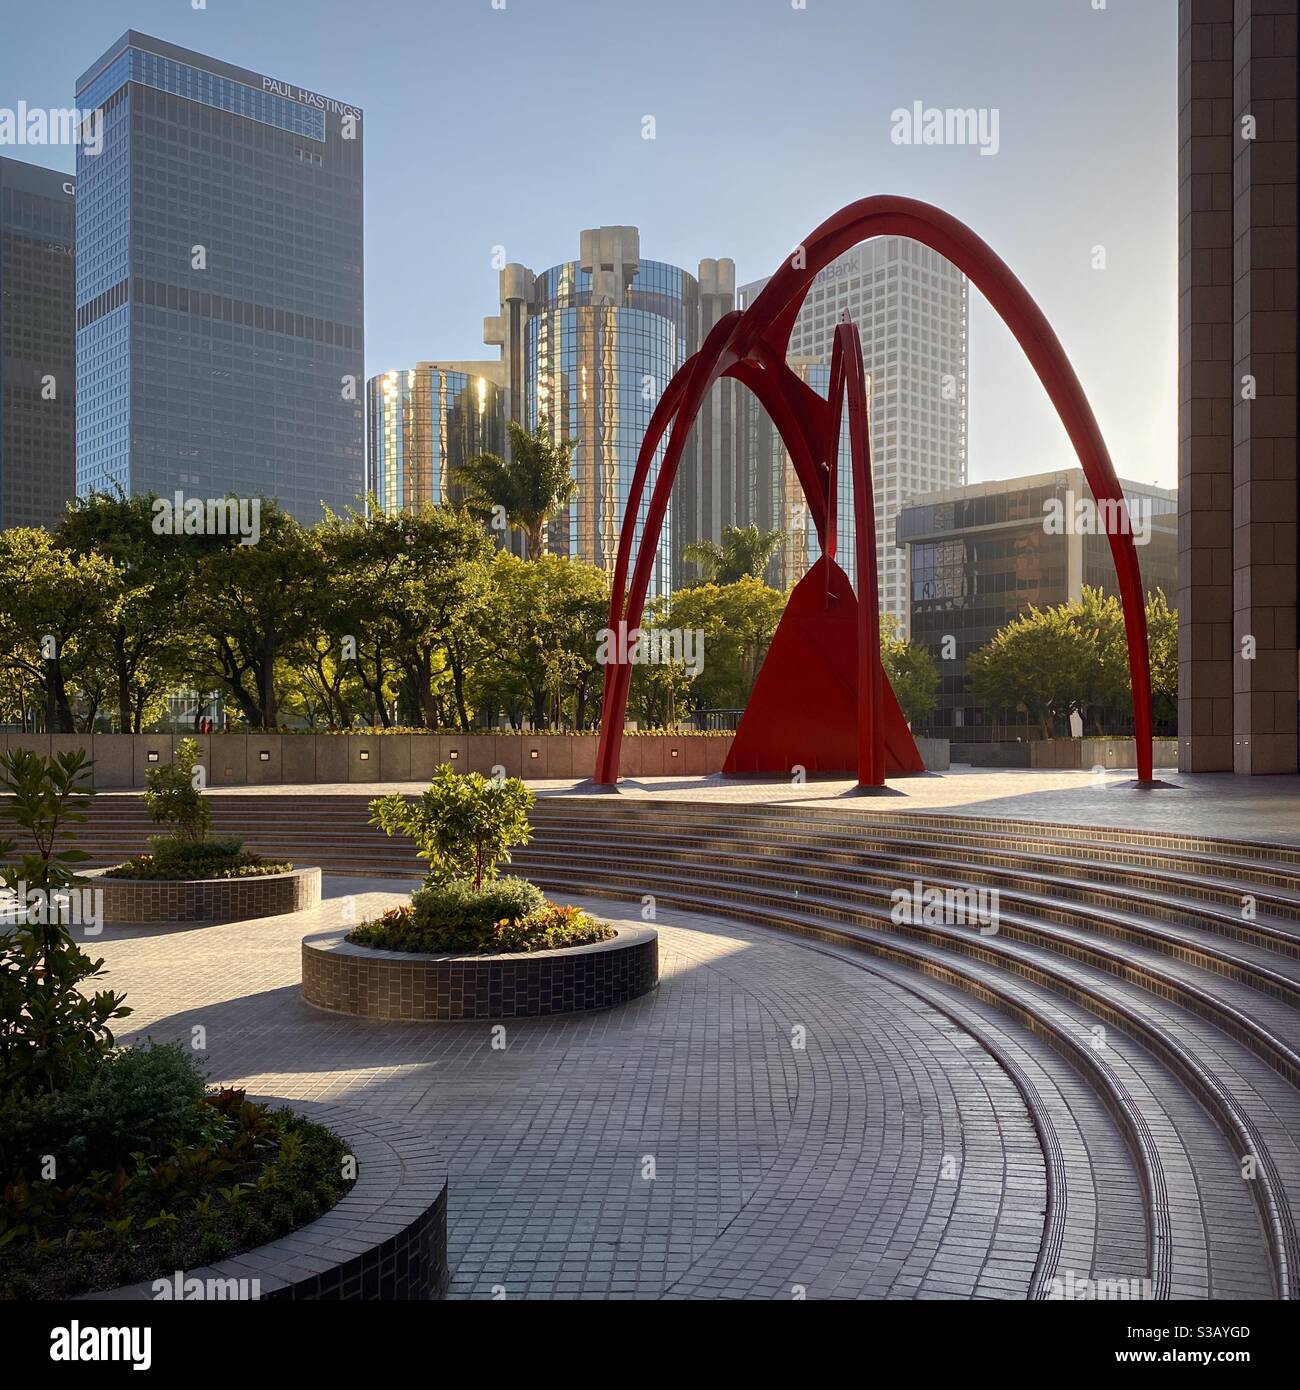 LOS ANGELES, CA, JUL 2020: bright red steel, Four Arches 'stabile'by Alexander Calder at Bank of America Plaza, with curving pavement features designed to complement the sculpture in Downtown Stock Photo